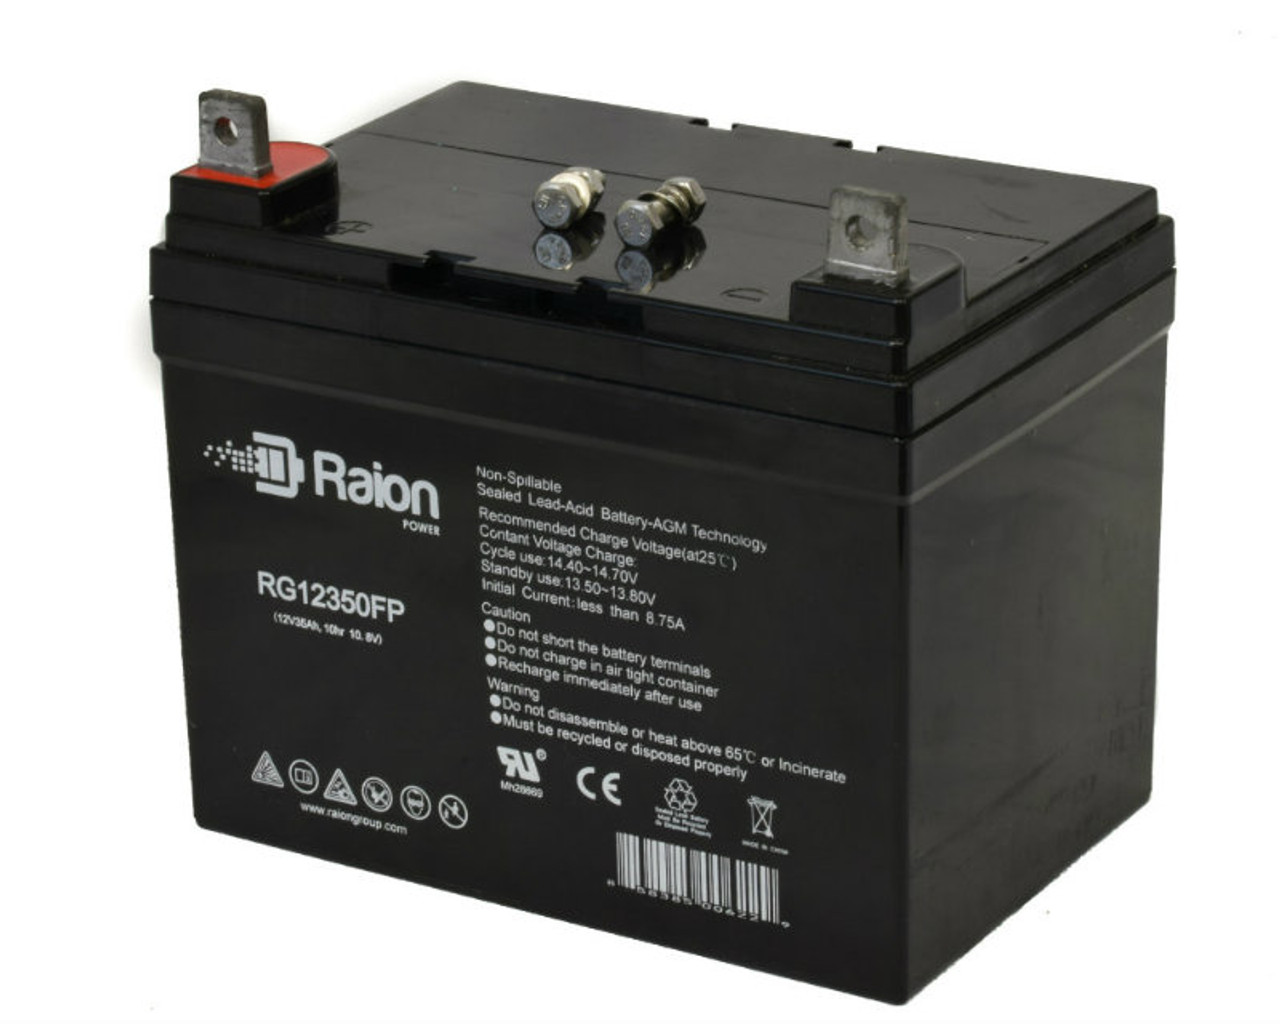 Raion Power Replacement 12V 35Ah Battery for Bolens by Textron STH125 - 1 Pack